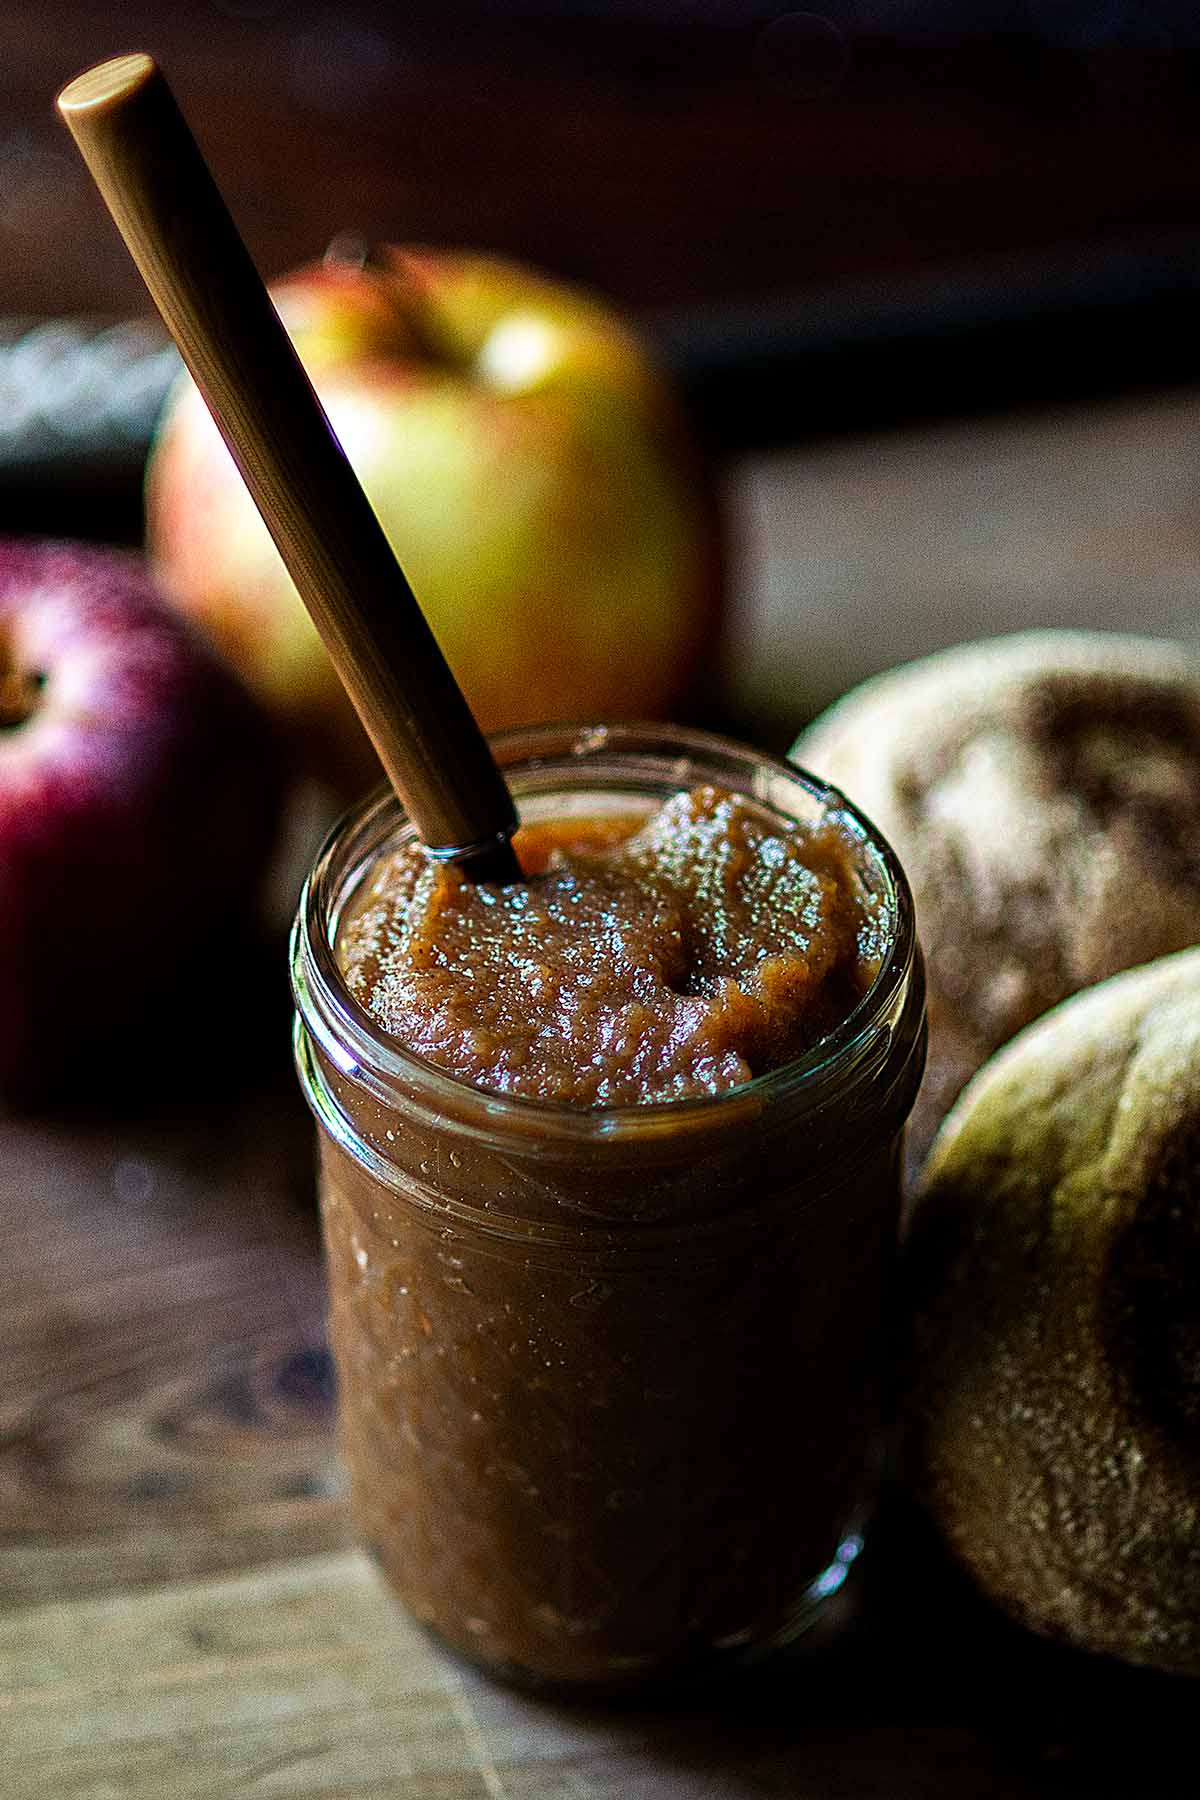 Apple butter in a jar with a spoon and english muffins.